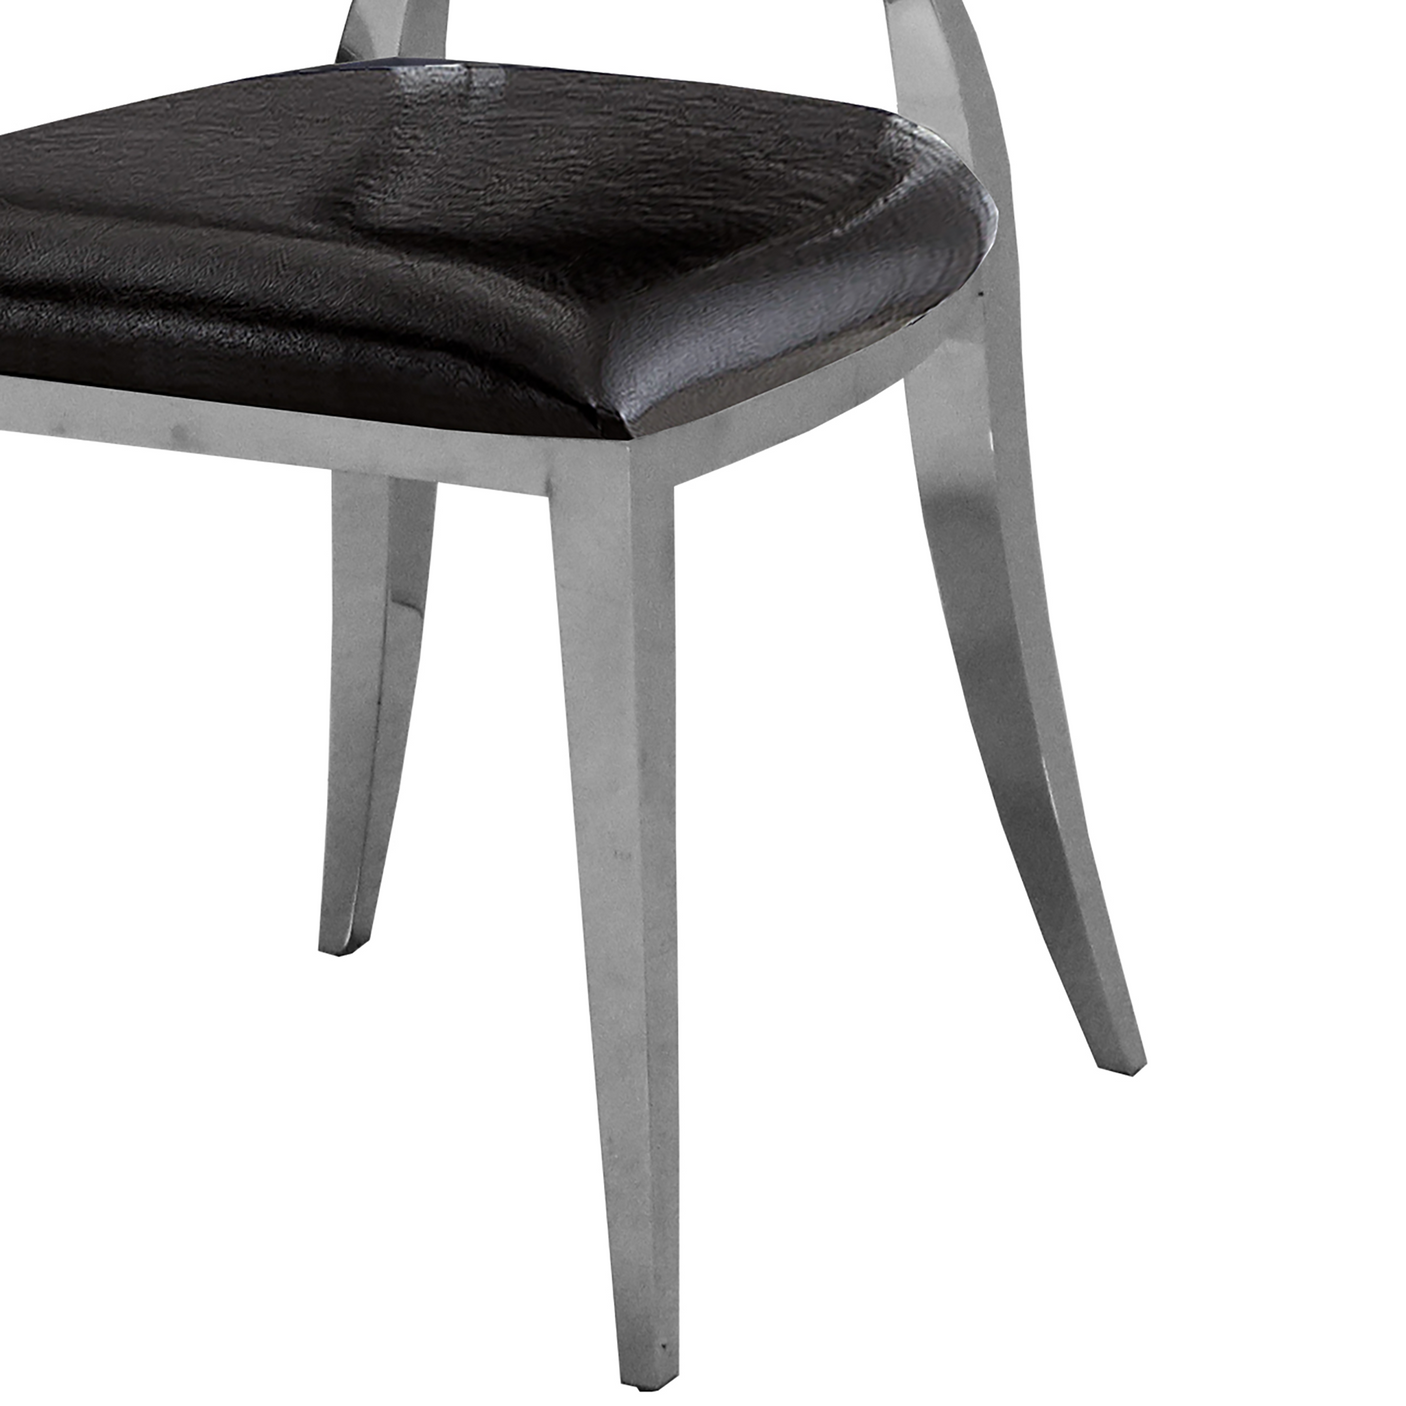 Leatherette Dining Chair Set of 2, Oval Backrest Design and Stainless Steel Legs